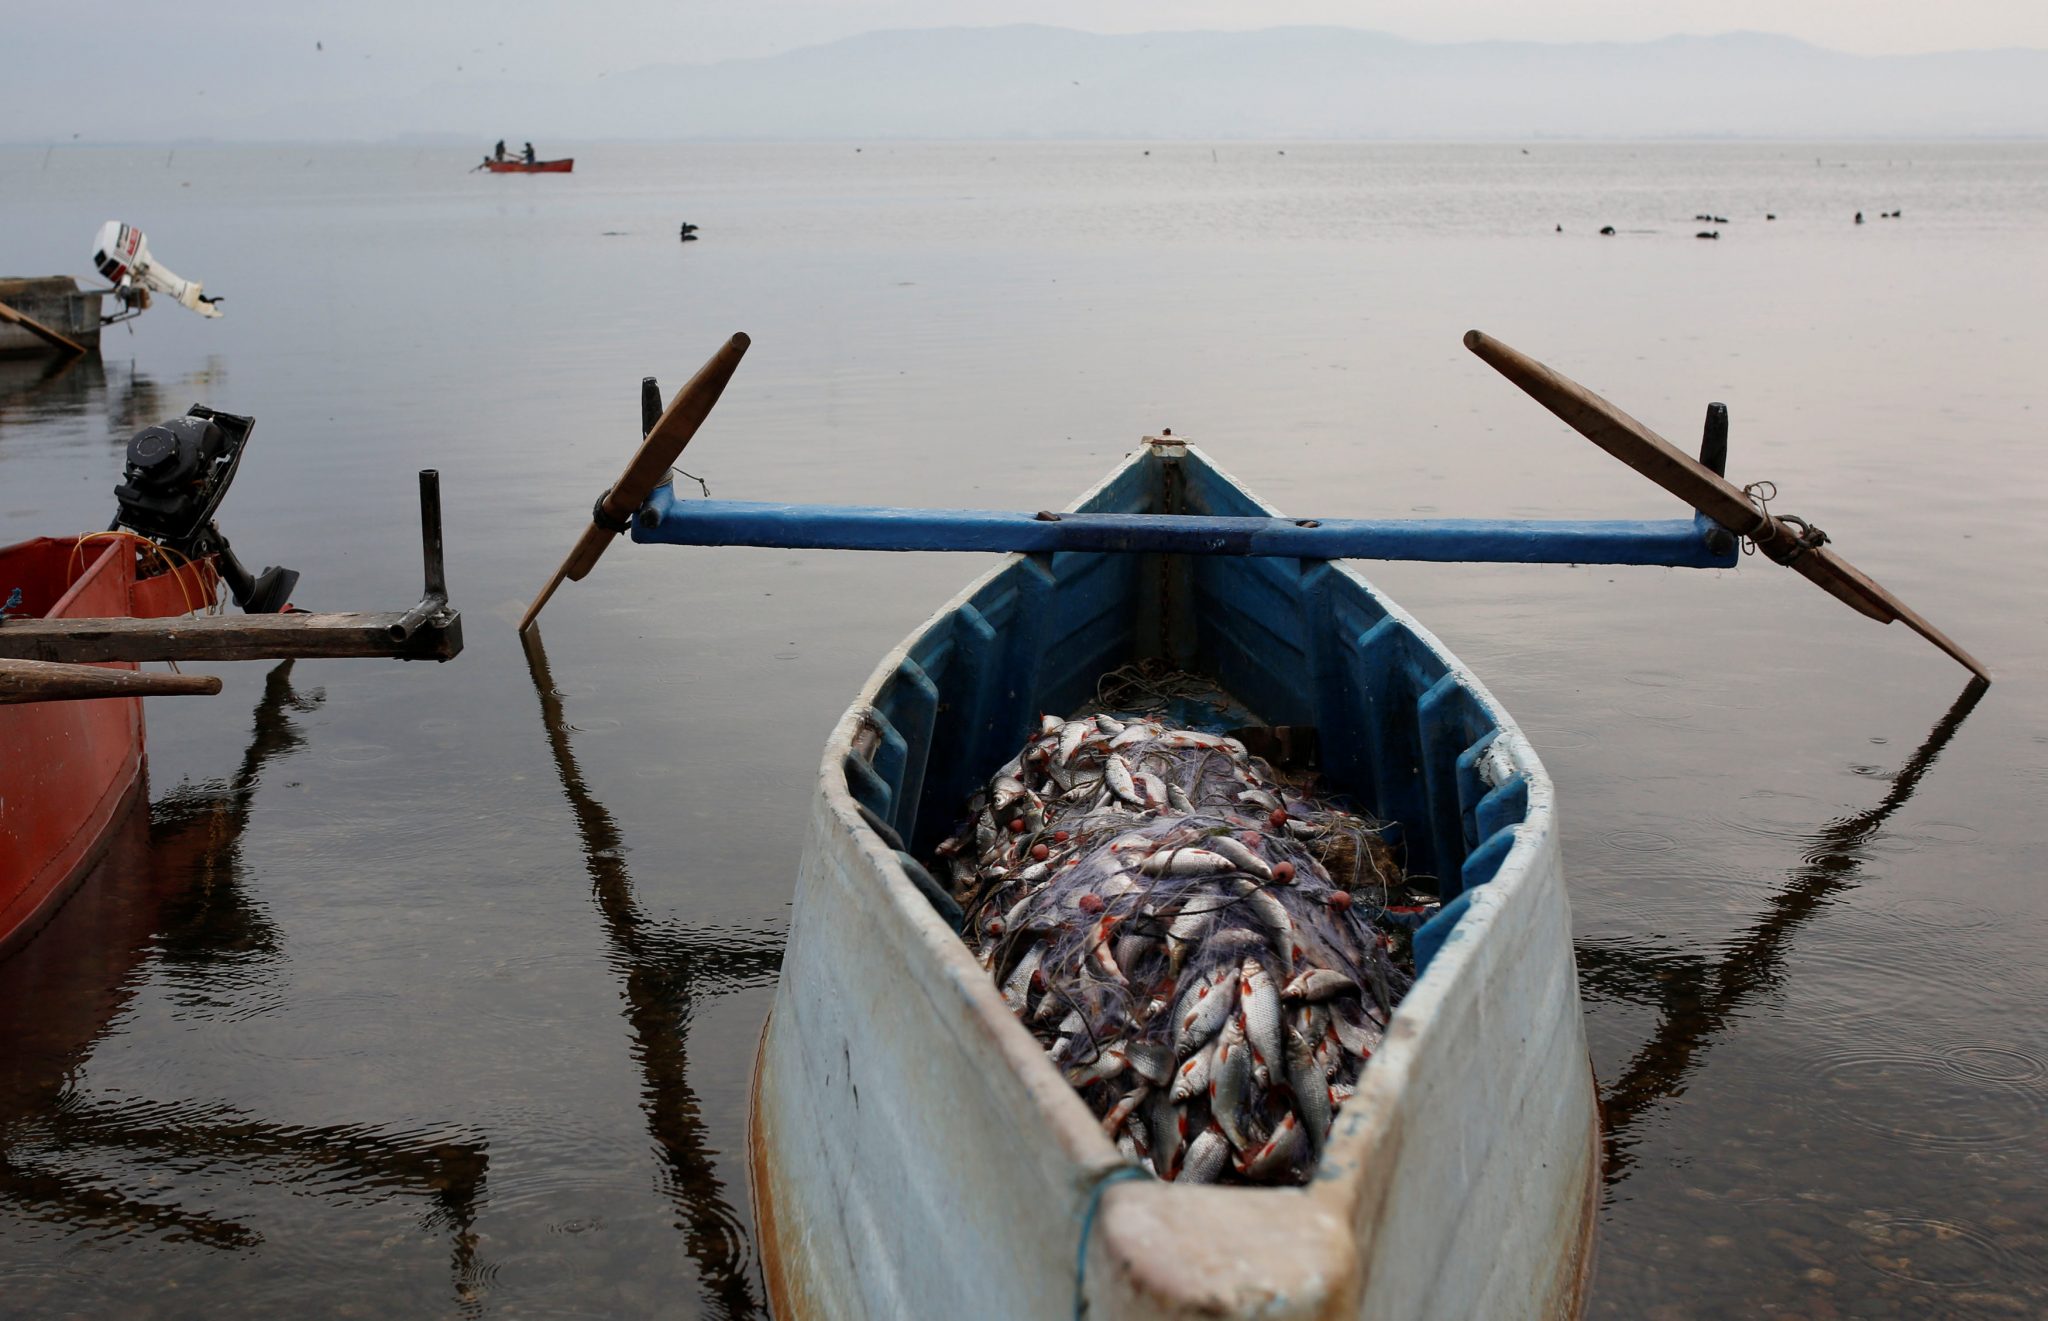 Fish is seen after it has been collected by fishermen at Dojran Lake, Macedonia, January 4, 2017. (Photo by Ognen Teofilovski/Reuters)